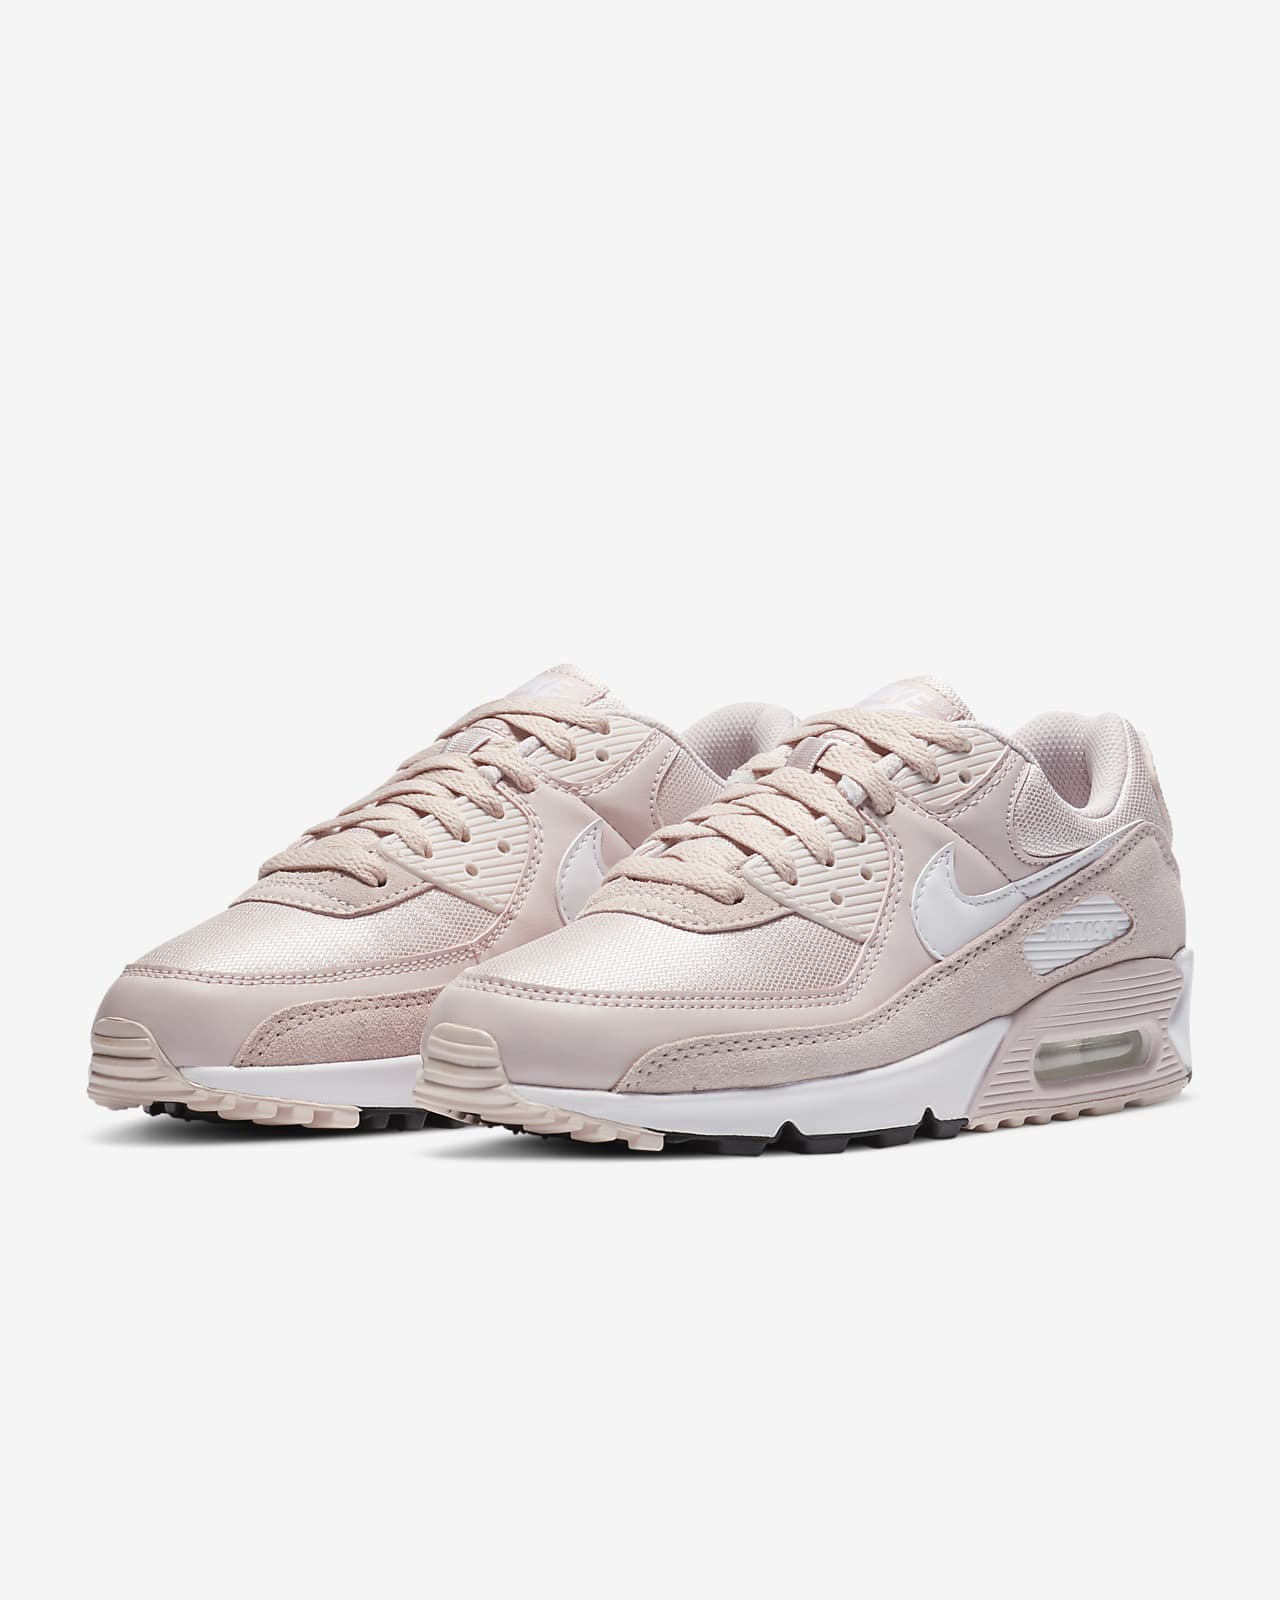 nike air max 90 size up or down